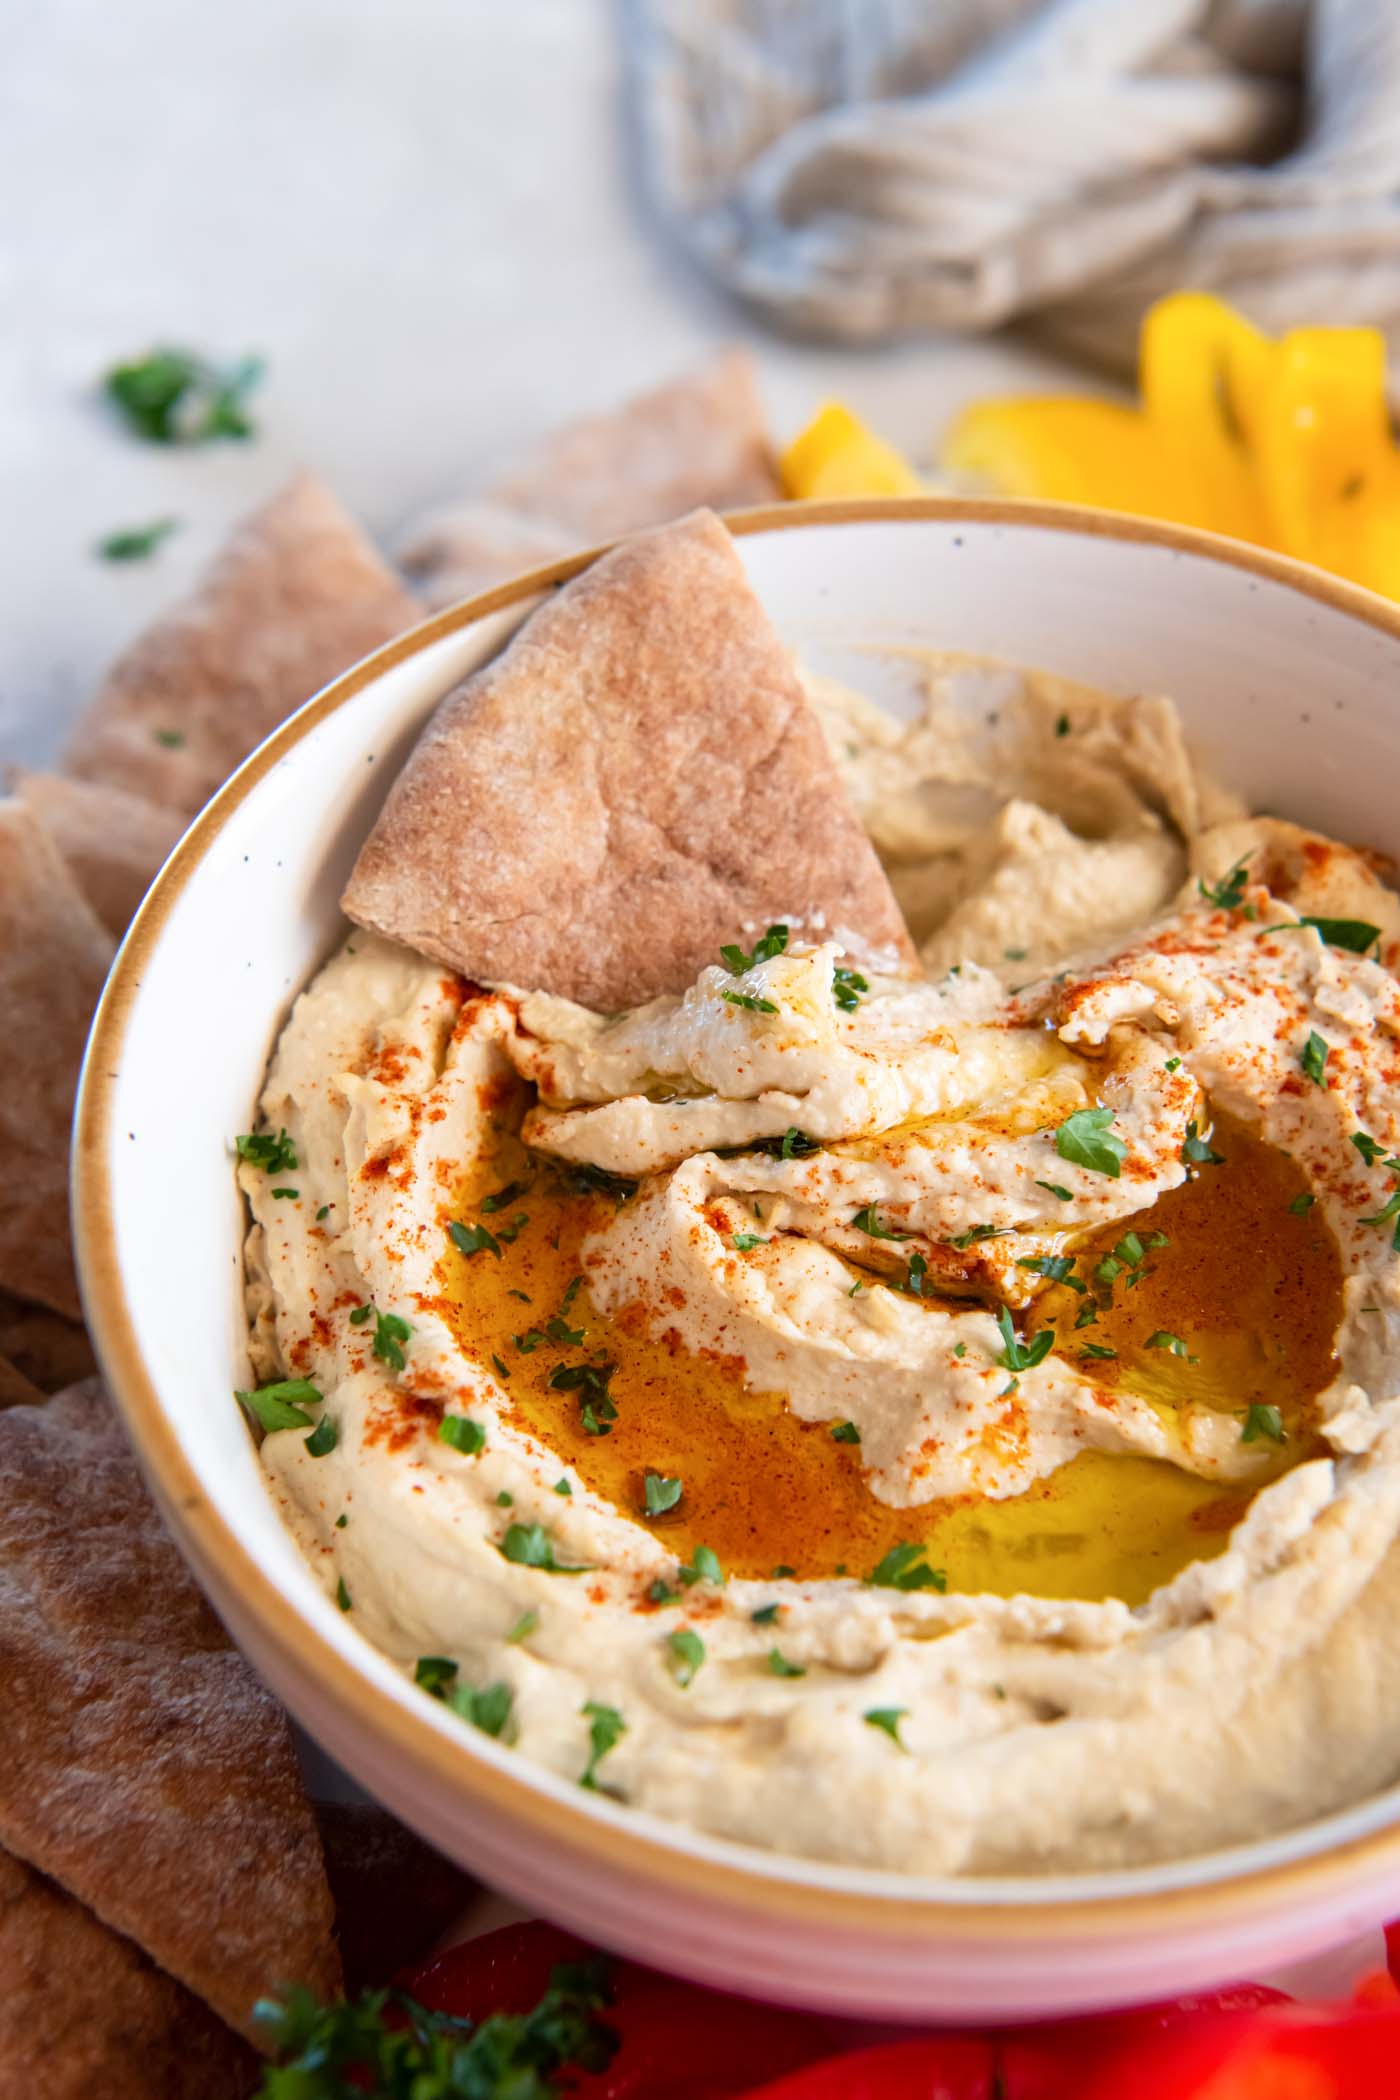 Bowl of hummus with pita bread triangle dipped in it.